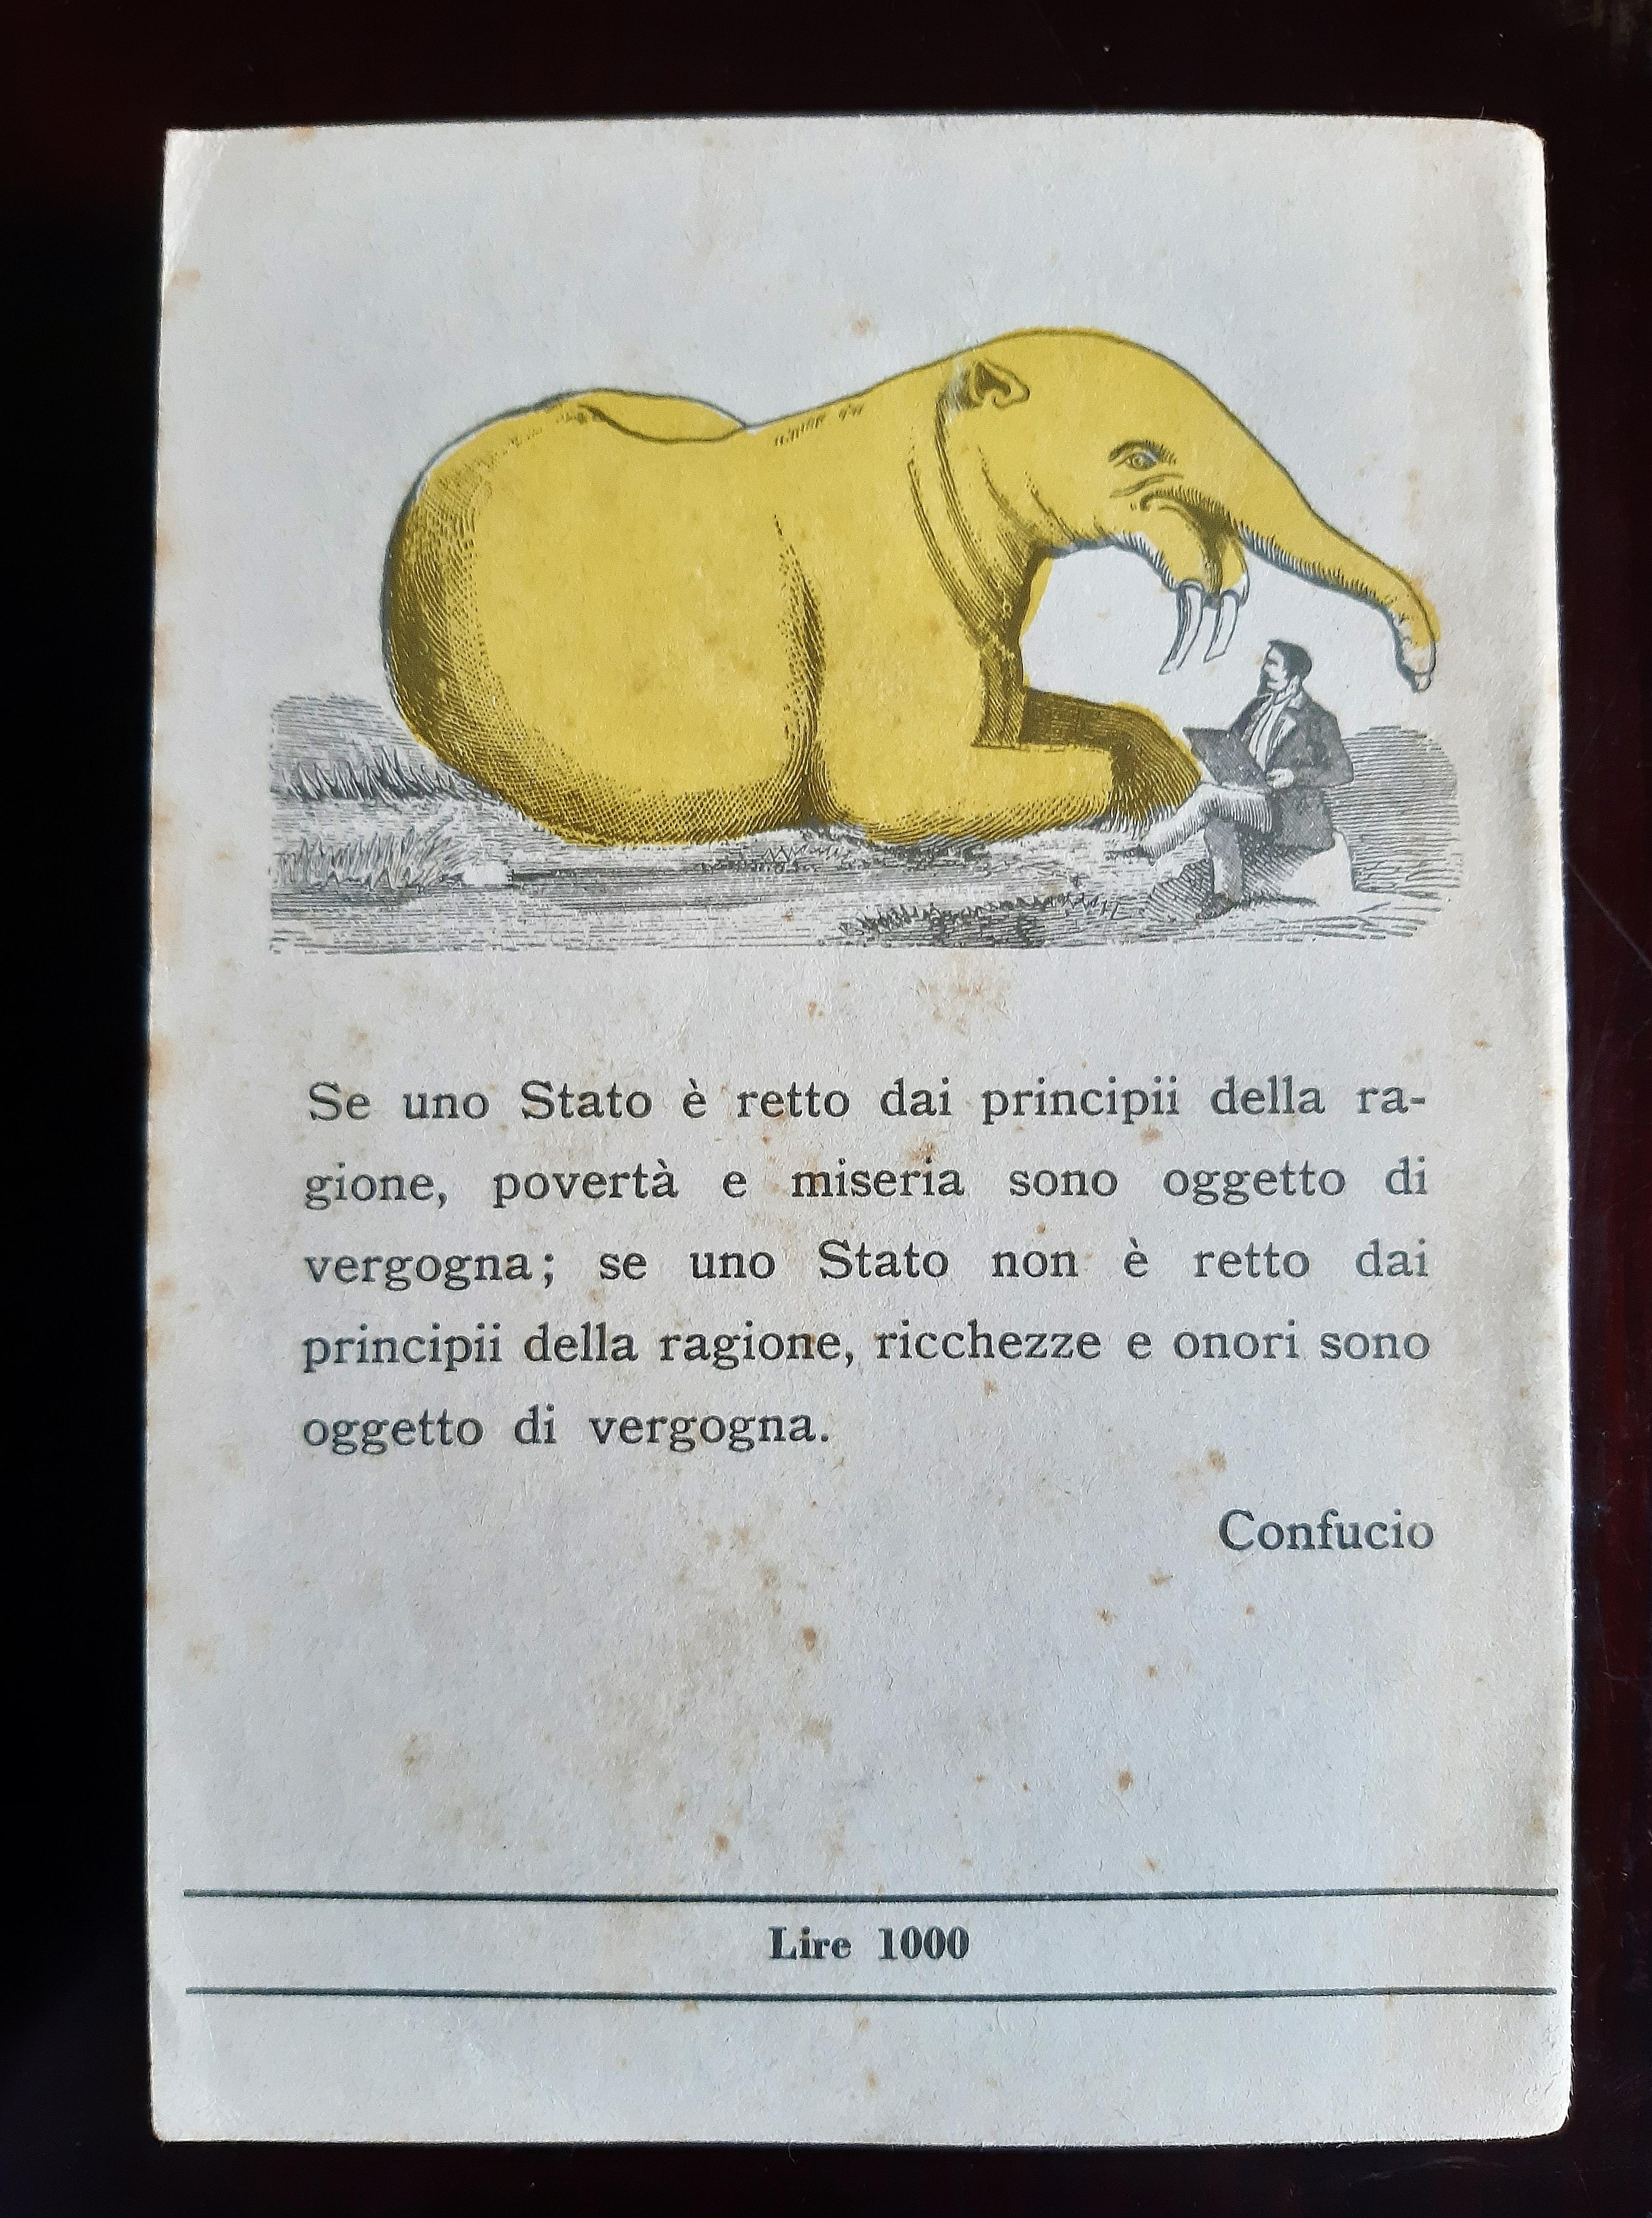 L’Antipatico - Almanacco per il 1960 is an original modern rare book written by Italo Cremona and illustrated by Mino Maccari (Siena,  1898 – Rome, 1989) in 1959.

Original First Edition.

Published by Vallecchi, Florence.

Format: in 8°. The